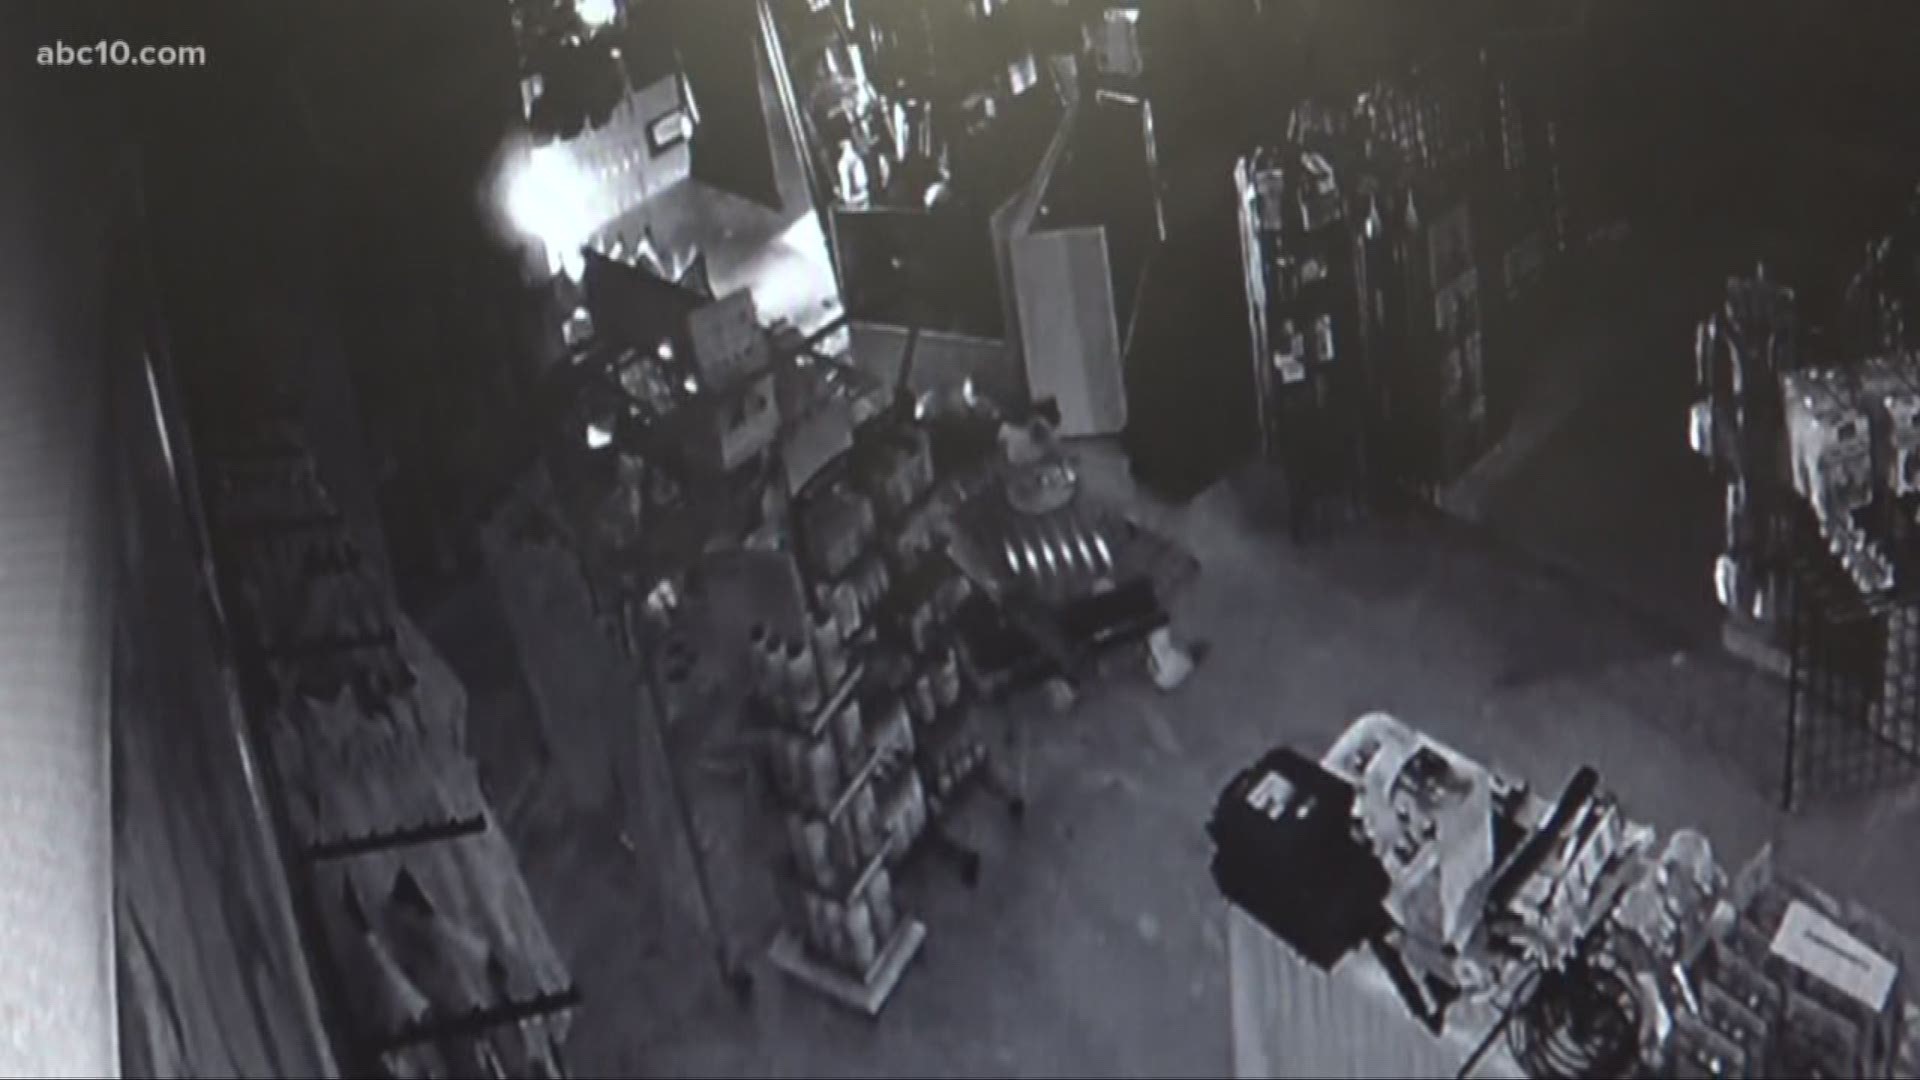 The supply store security camera shows the moment a man and a woman smash a white stolen van into the supply store then jump out and start frantically throwing the merchandise into the vehicle.